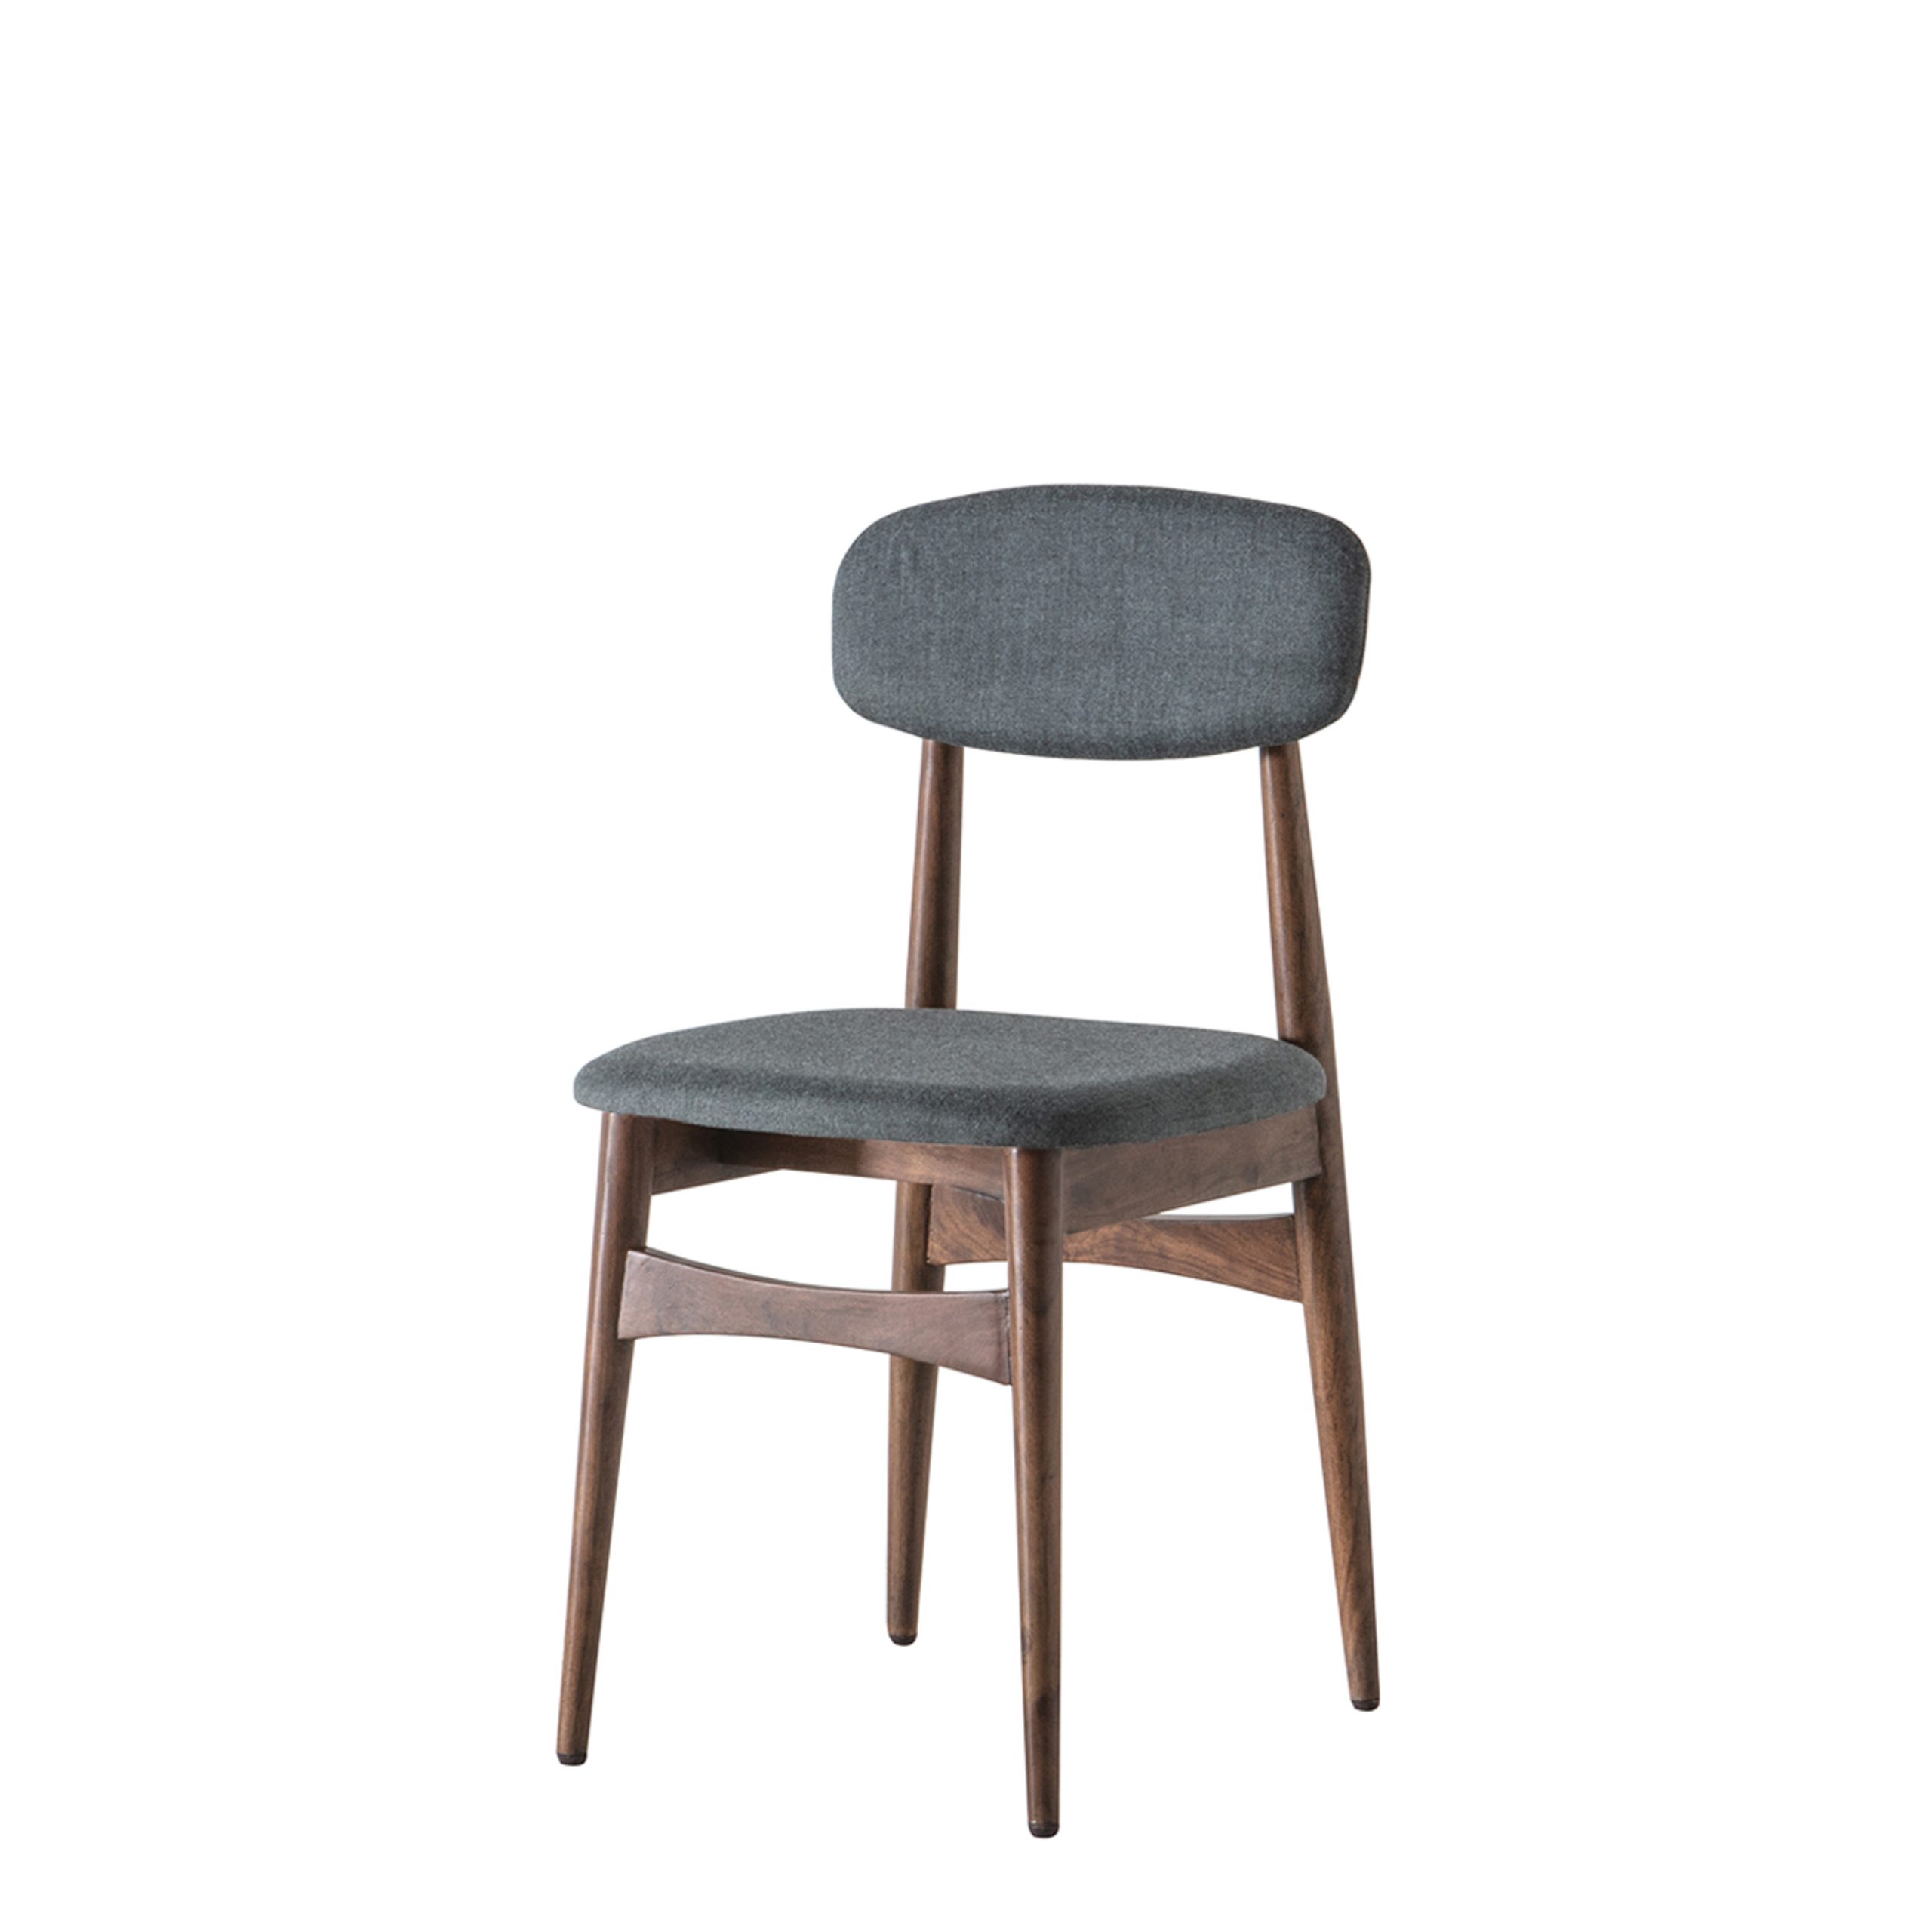 Gallery Direct Barcelona Chair (Set of 2)